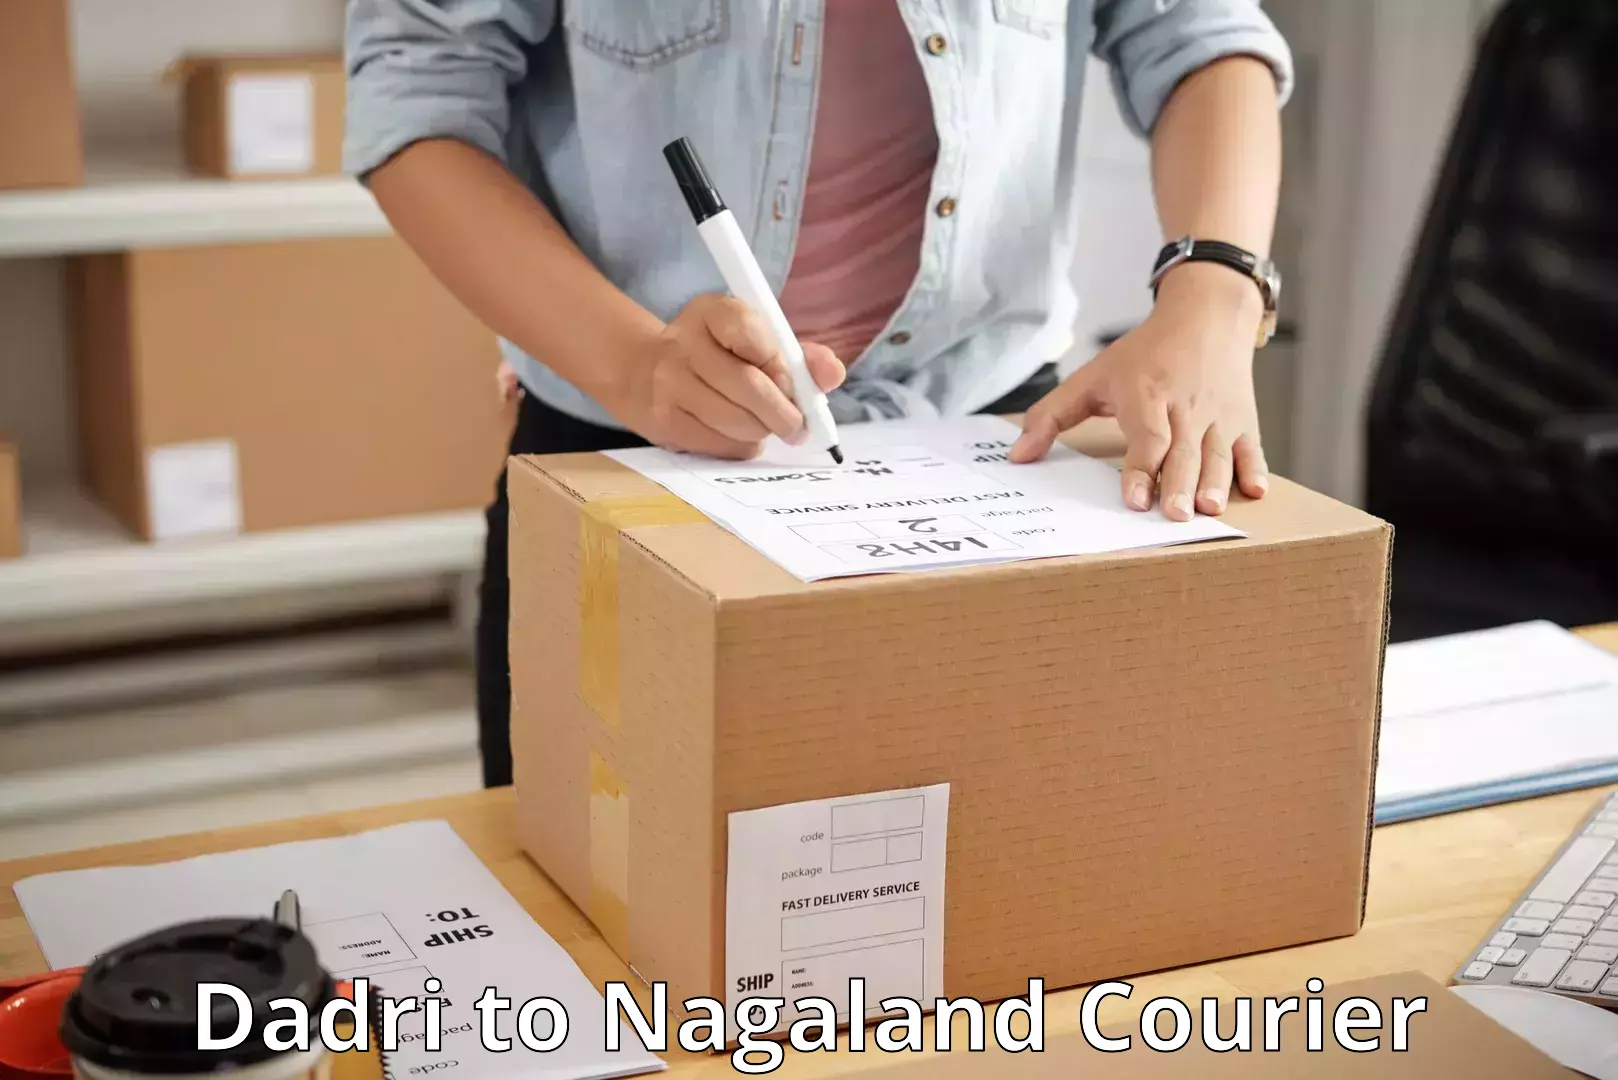 High-priority parcel service Dadri to Nagaland